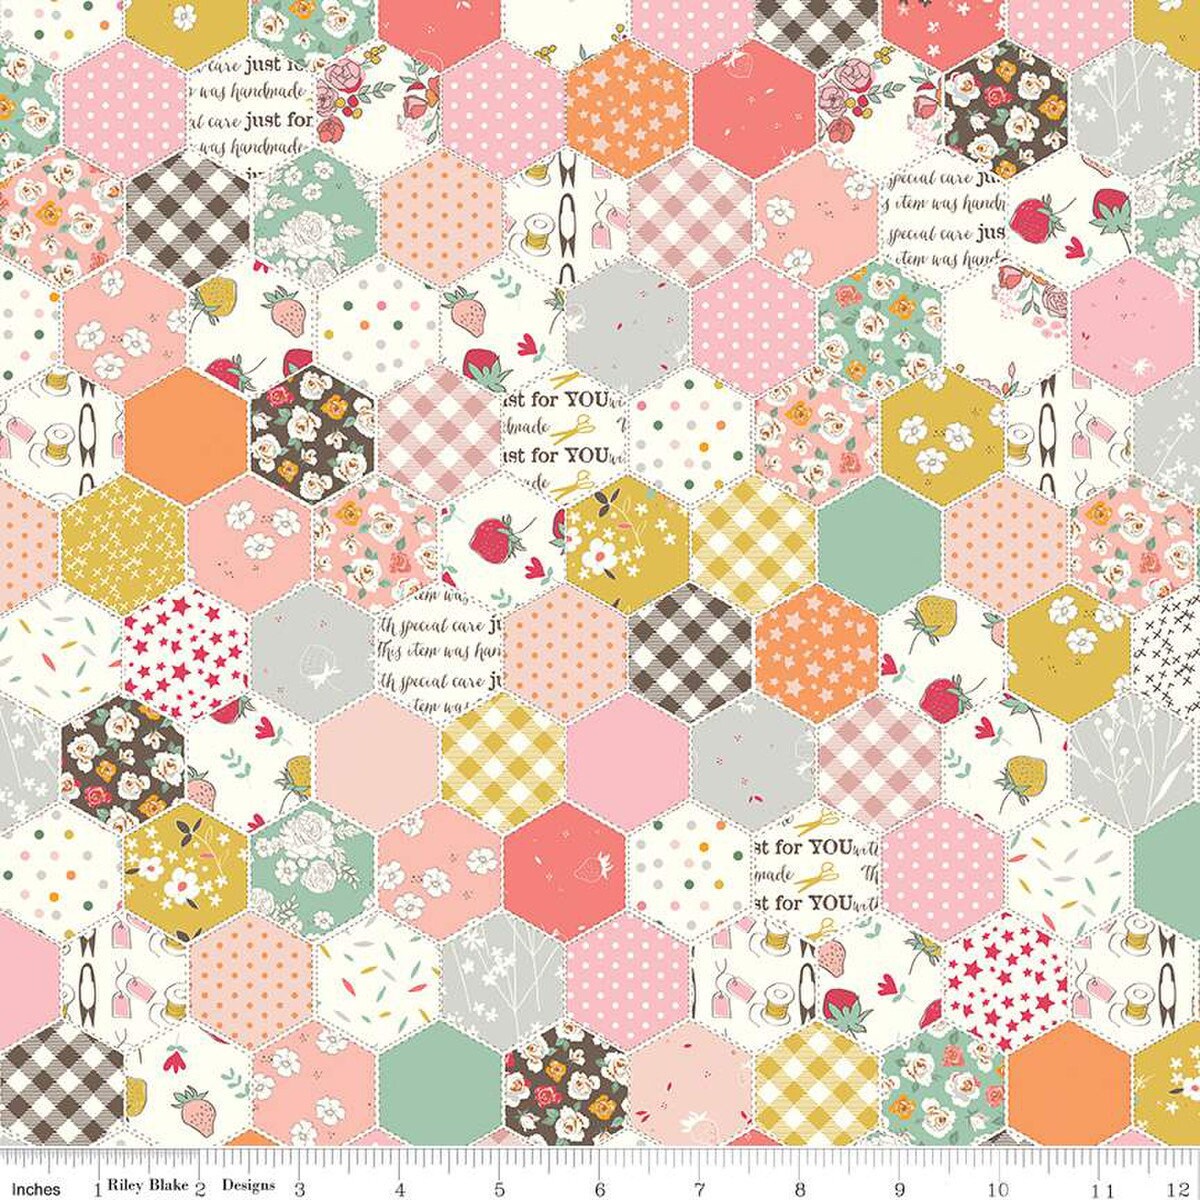 Cheater Print Multi by Minki Kim for Riley Blake Designs BloomBerry Line